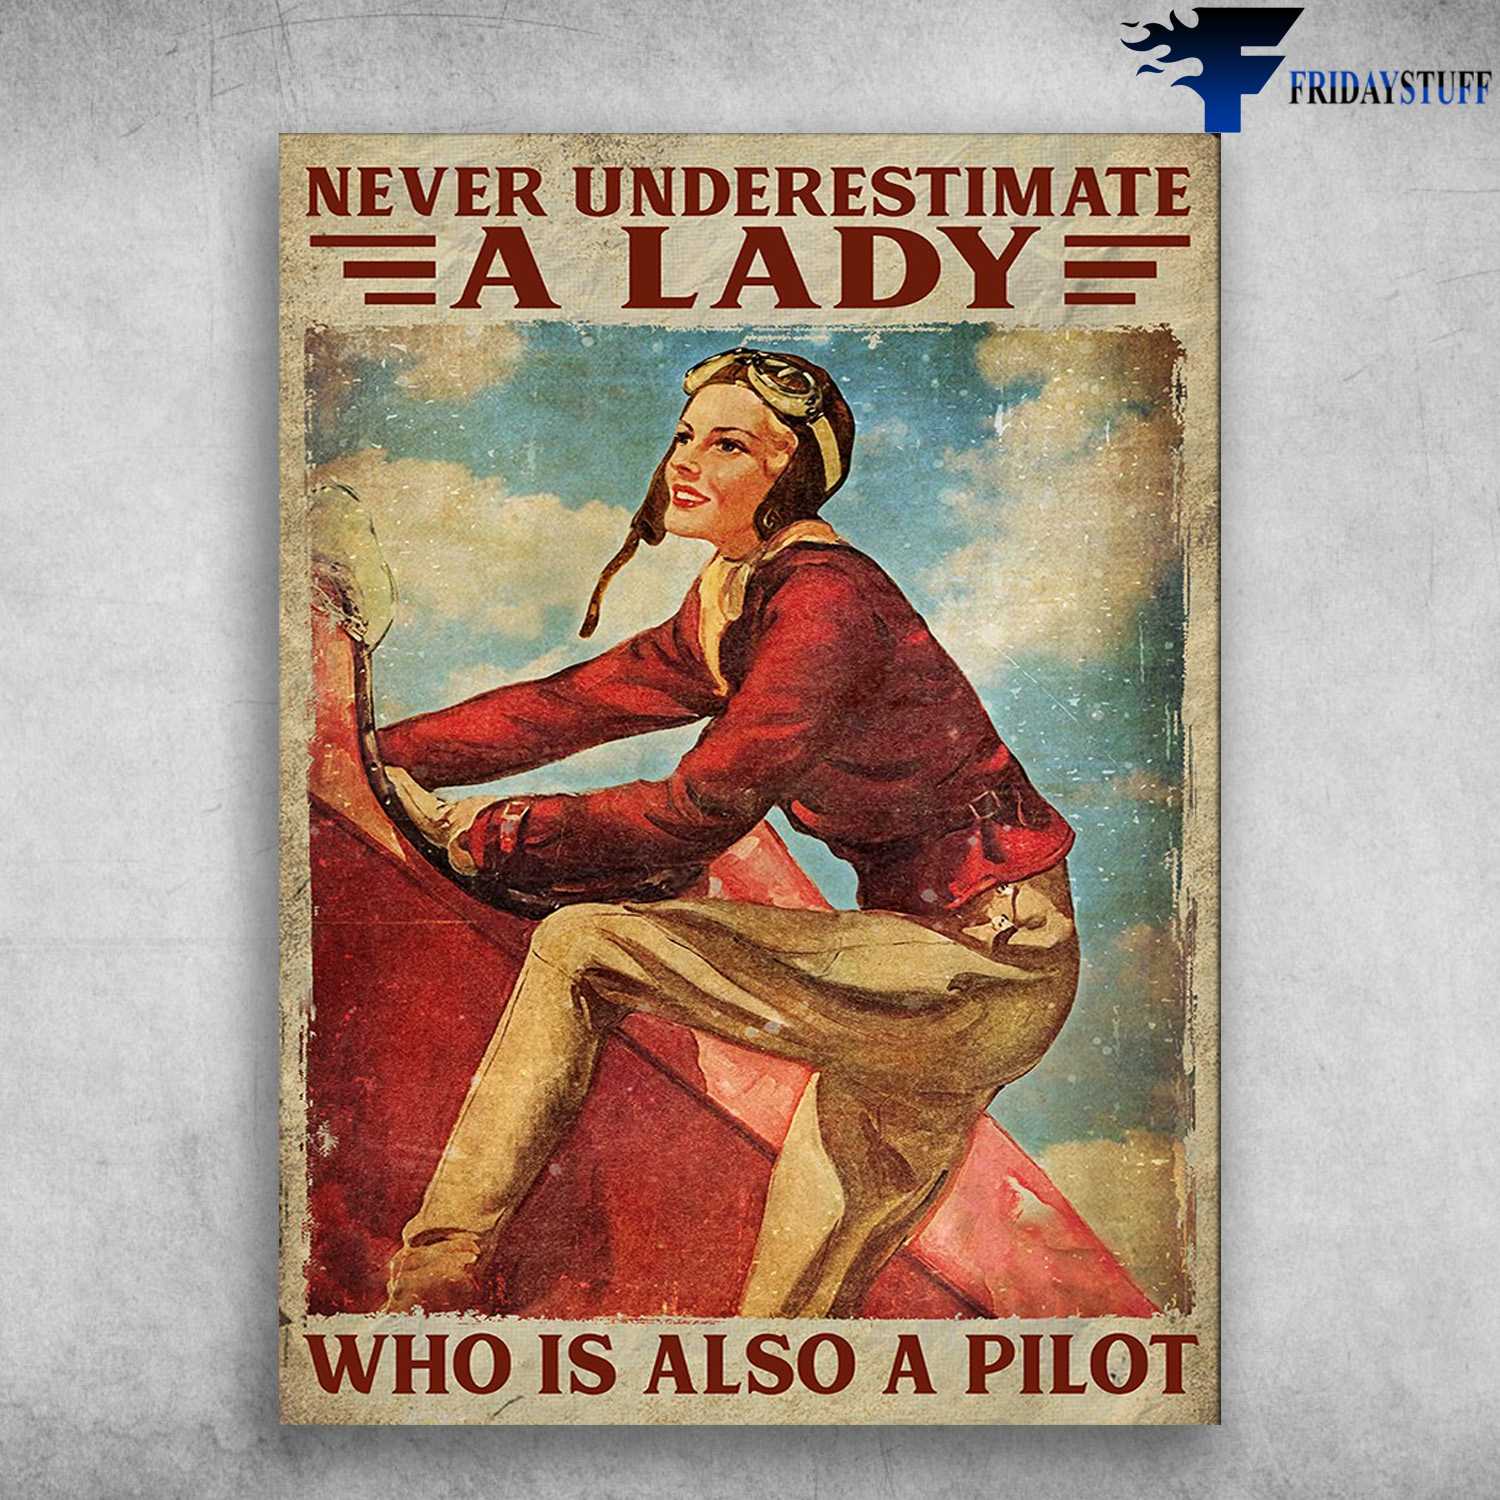 Female Pilot - Never Underestimate A Lady, Who Is Also A Pilot